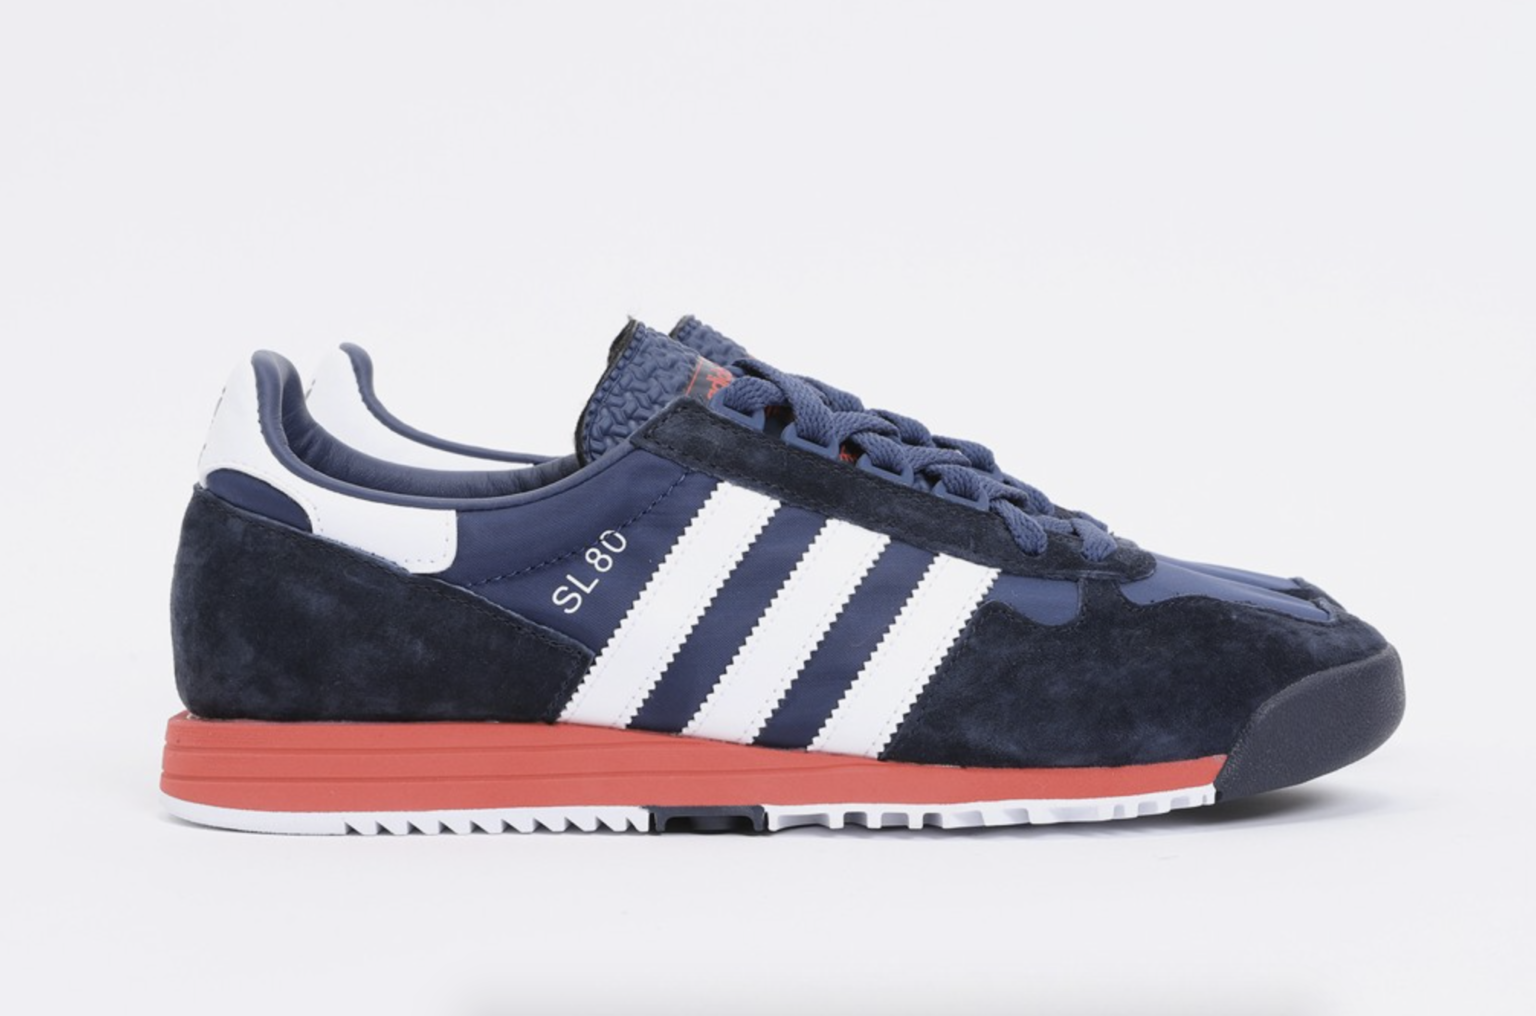 adidas SL 80 Available in Navy and Red